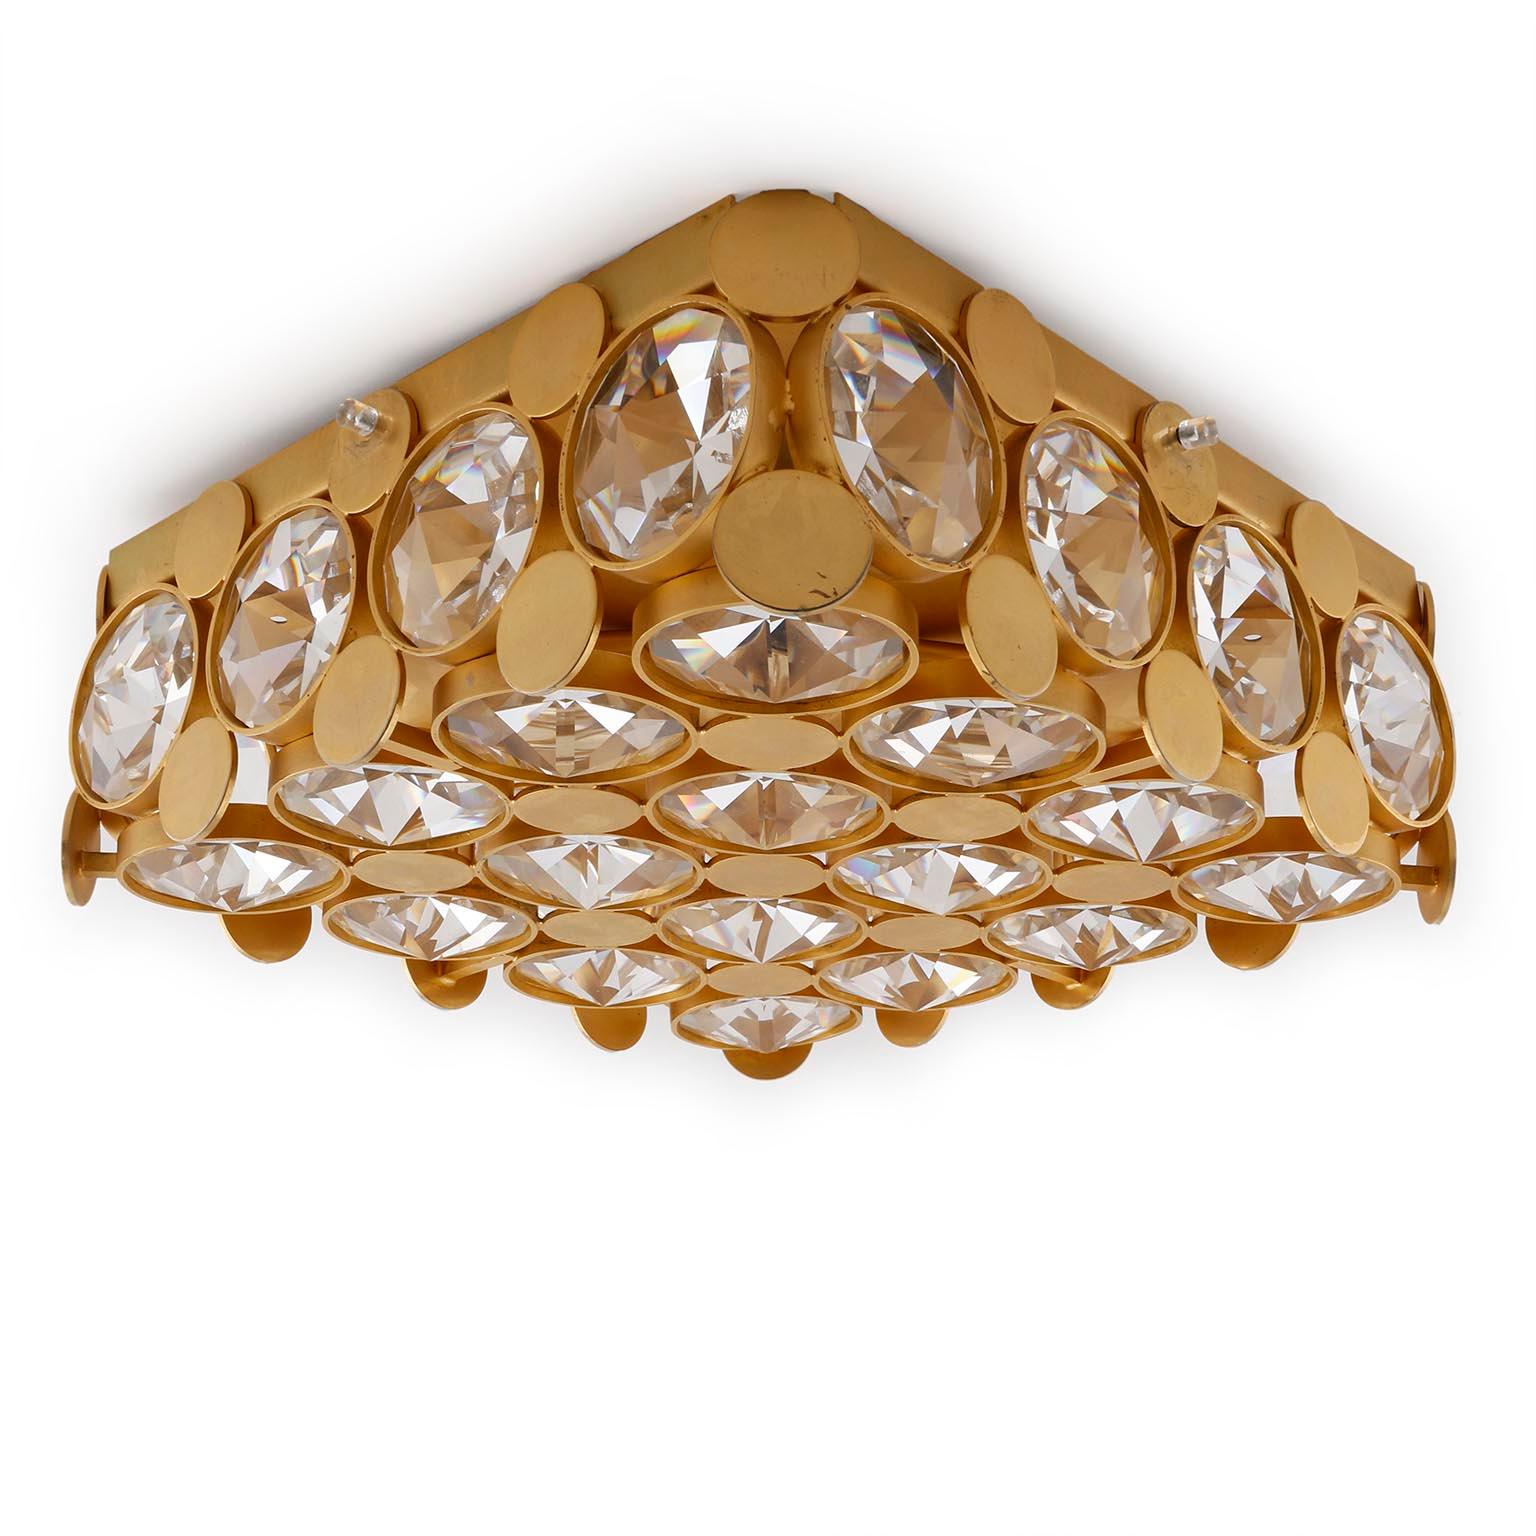 A geourgous square flush mount light by Palwa (Palme & Walter), Germany, manufactured in midcentury, circa 1970 (late 1960 or 1970s).
A gilt frame is decorated with diamond shaped cut crystal glass. The gilt surface is aged and has a matte tone.
The